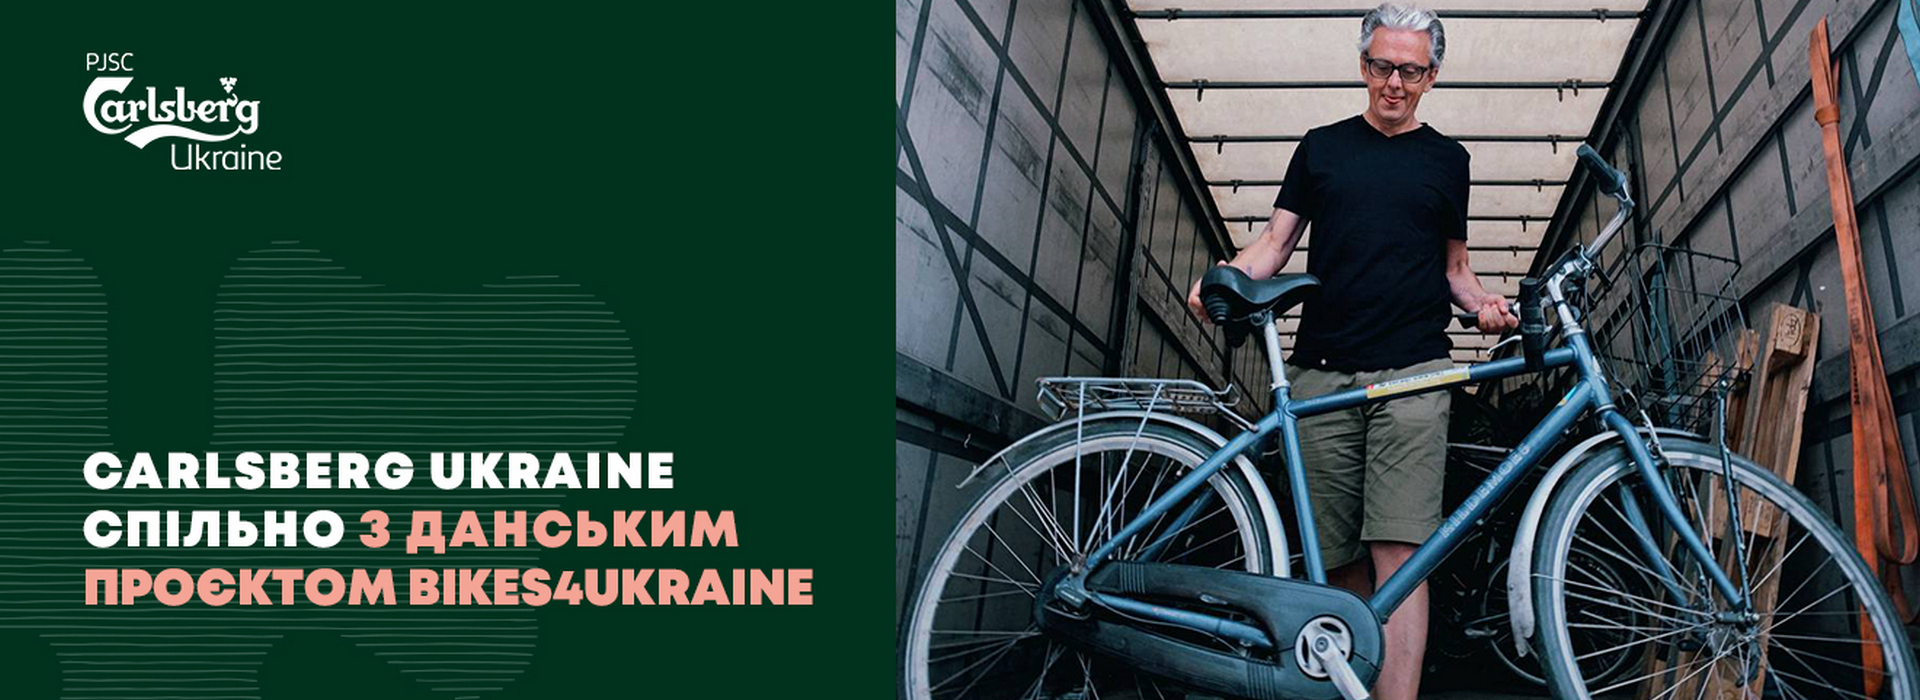 Carlsberg Ukraine Together with the Danish Project Bikes4Ukraine Provides Bicycles to Migrants in Lviv